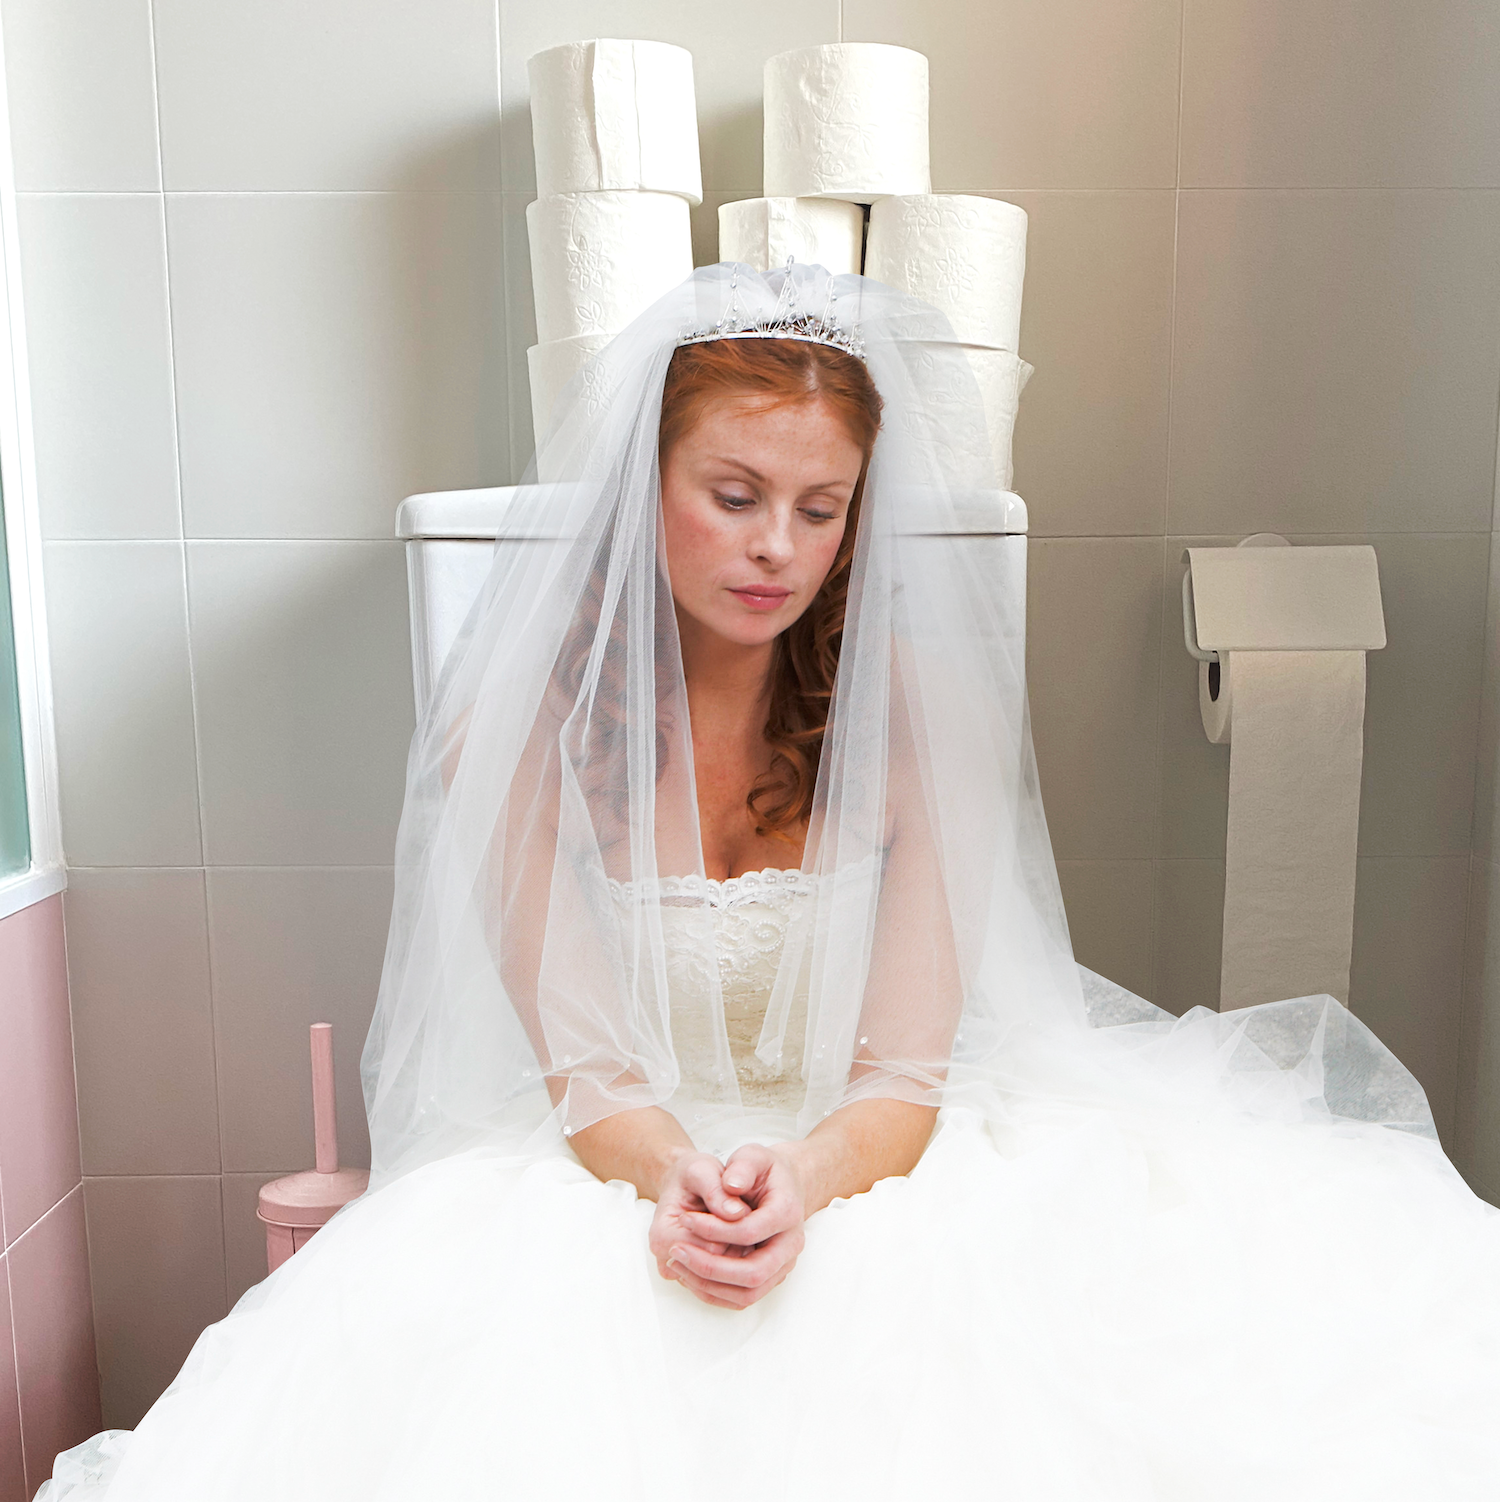 5 Brides With IBS Share Their Hard-Earned Wedding Day Tips